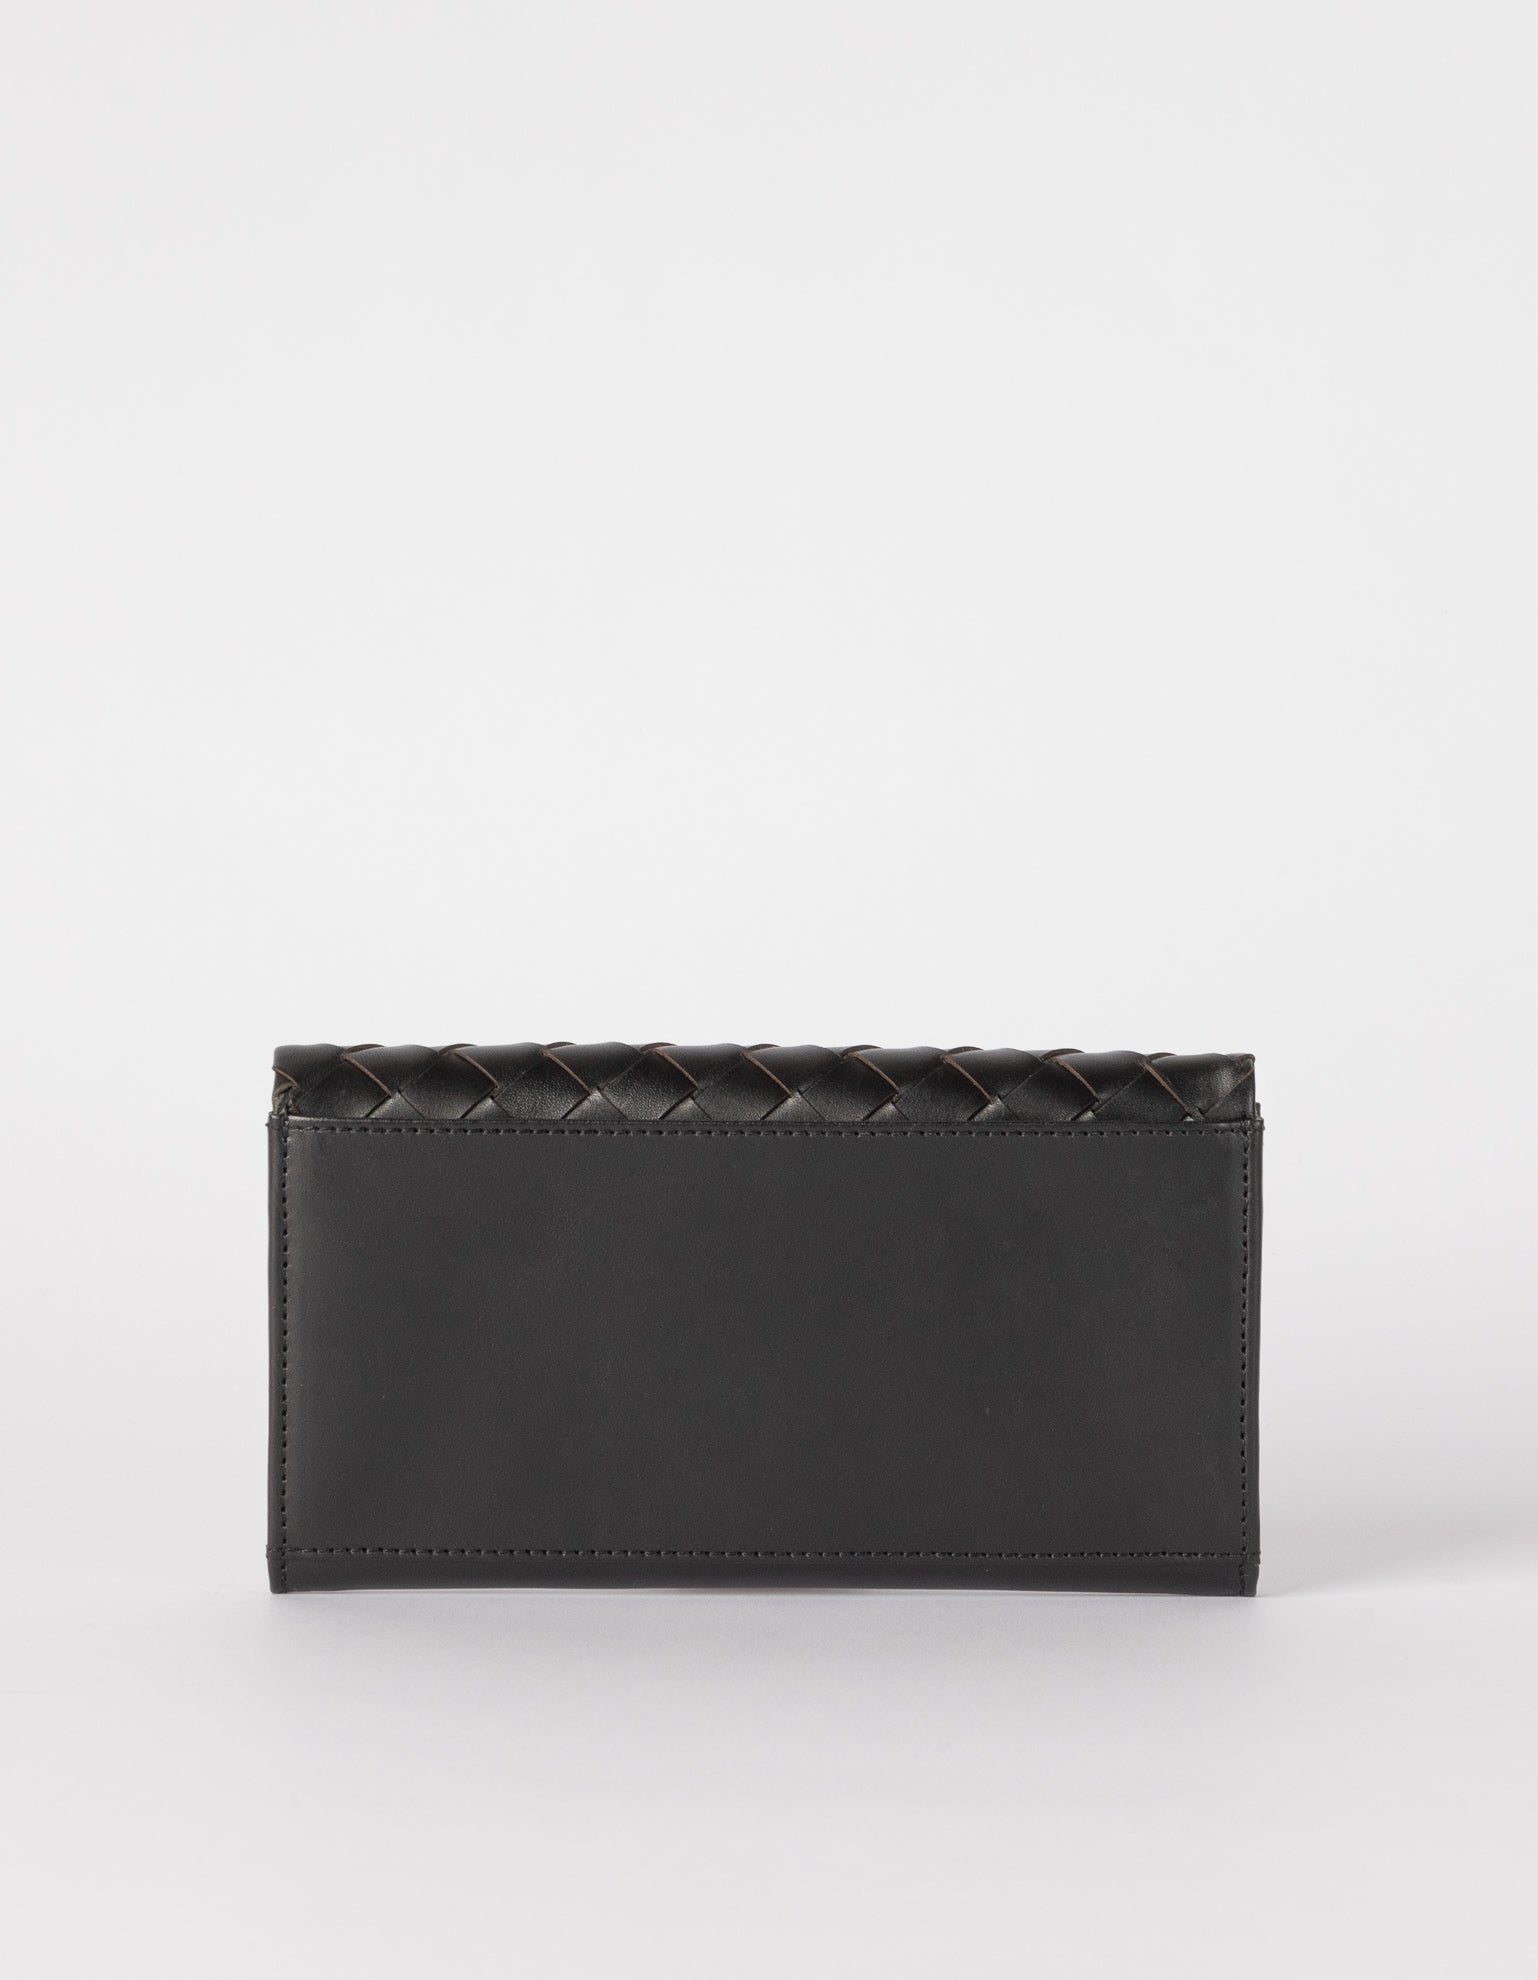 woven leather wallet - back product image